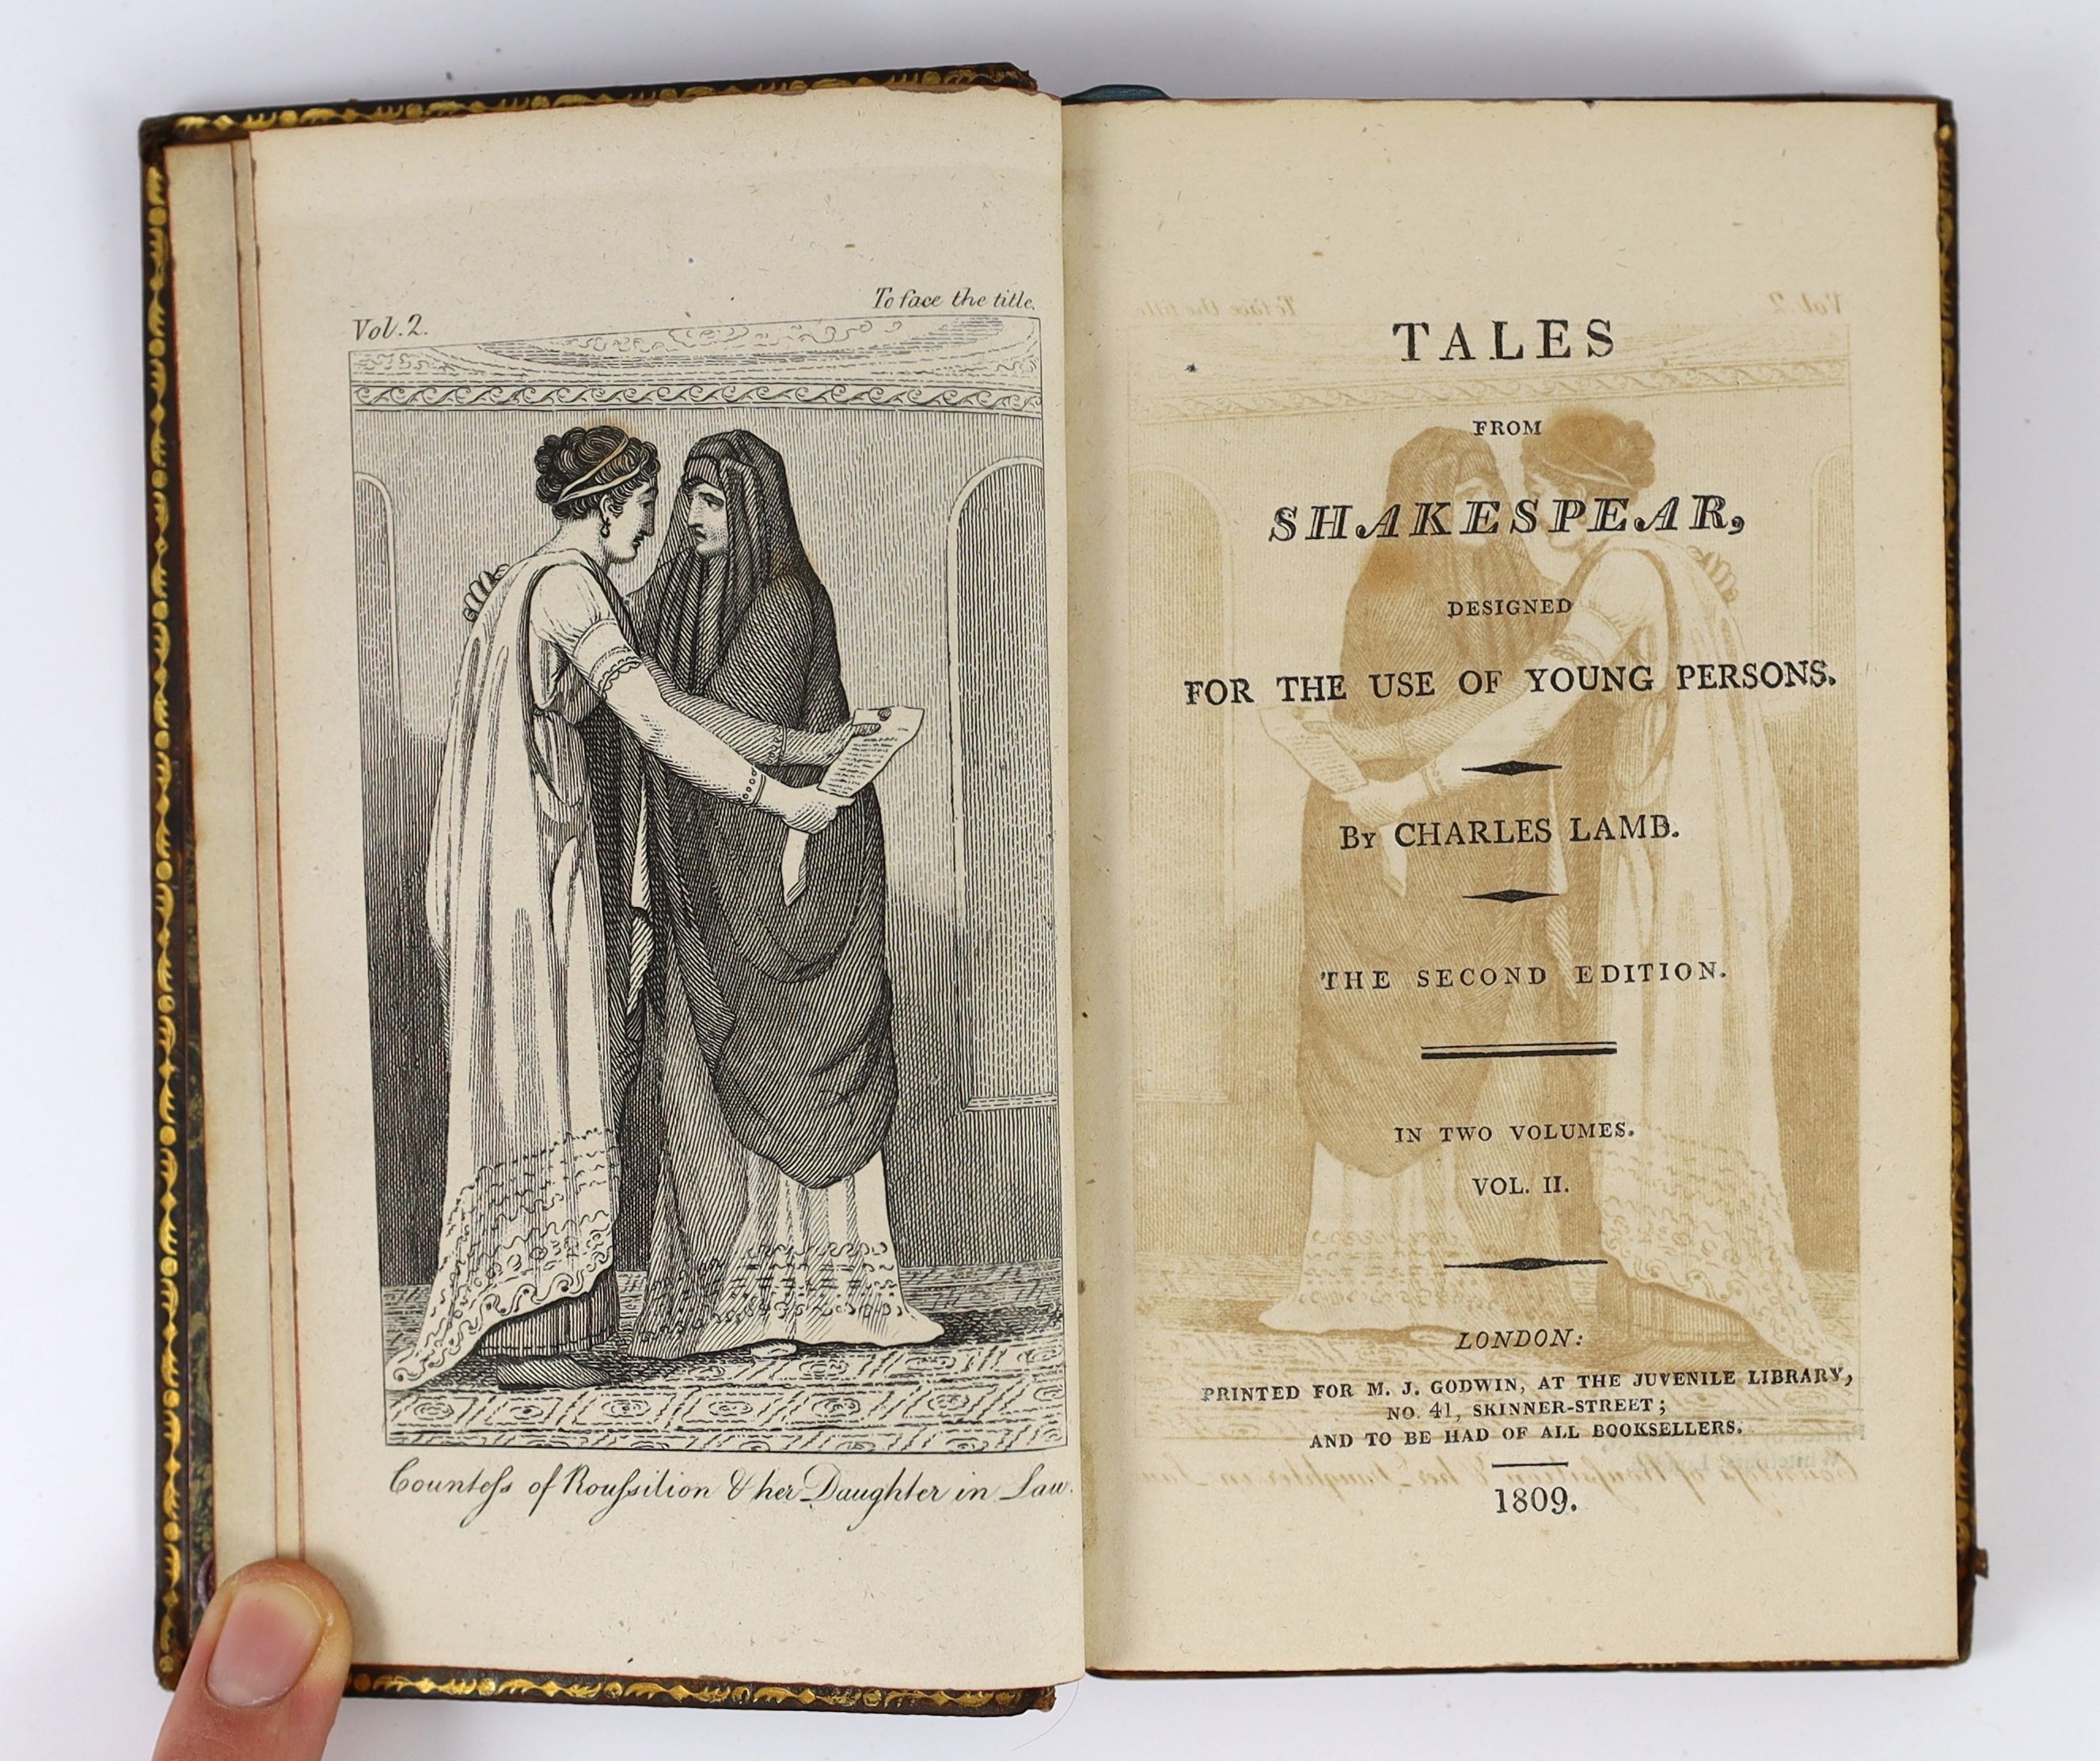 Lamb, Charles & Mary - Tales from Shakespear [sic] designed for the use of Young Persons, 2vols, 2nd edition, 12mo, diced Russia calf, with 20 plates, variously attributed to William Blake or William Mulready, M.J. Godwi